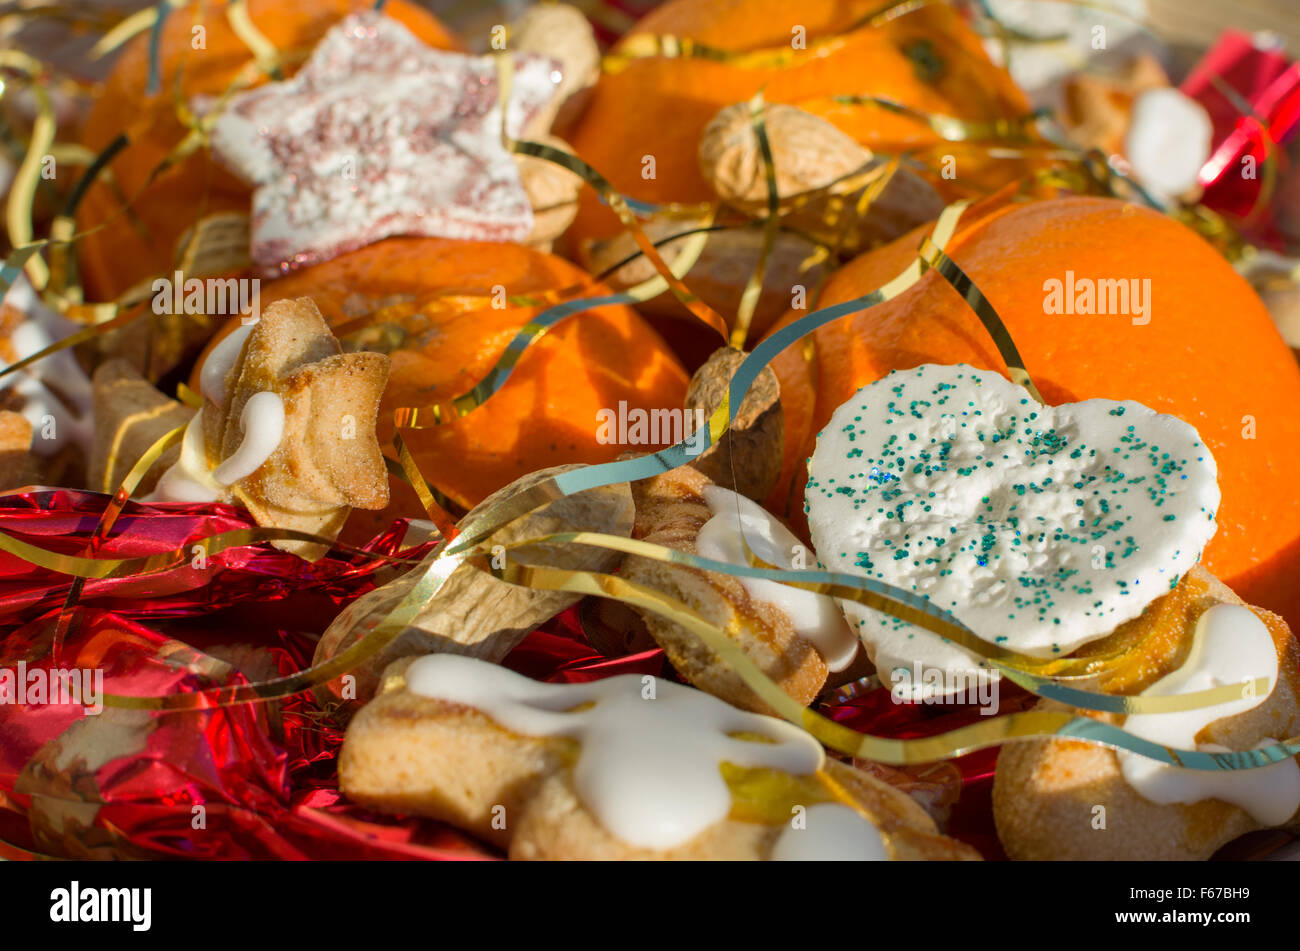 Christmas Still with Oranges Peanuts and Heart Decoration Covered with Angel Hair Closeup Stock Photo